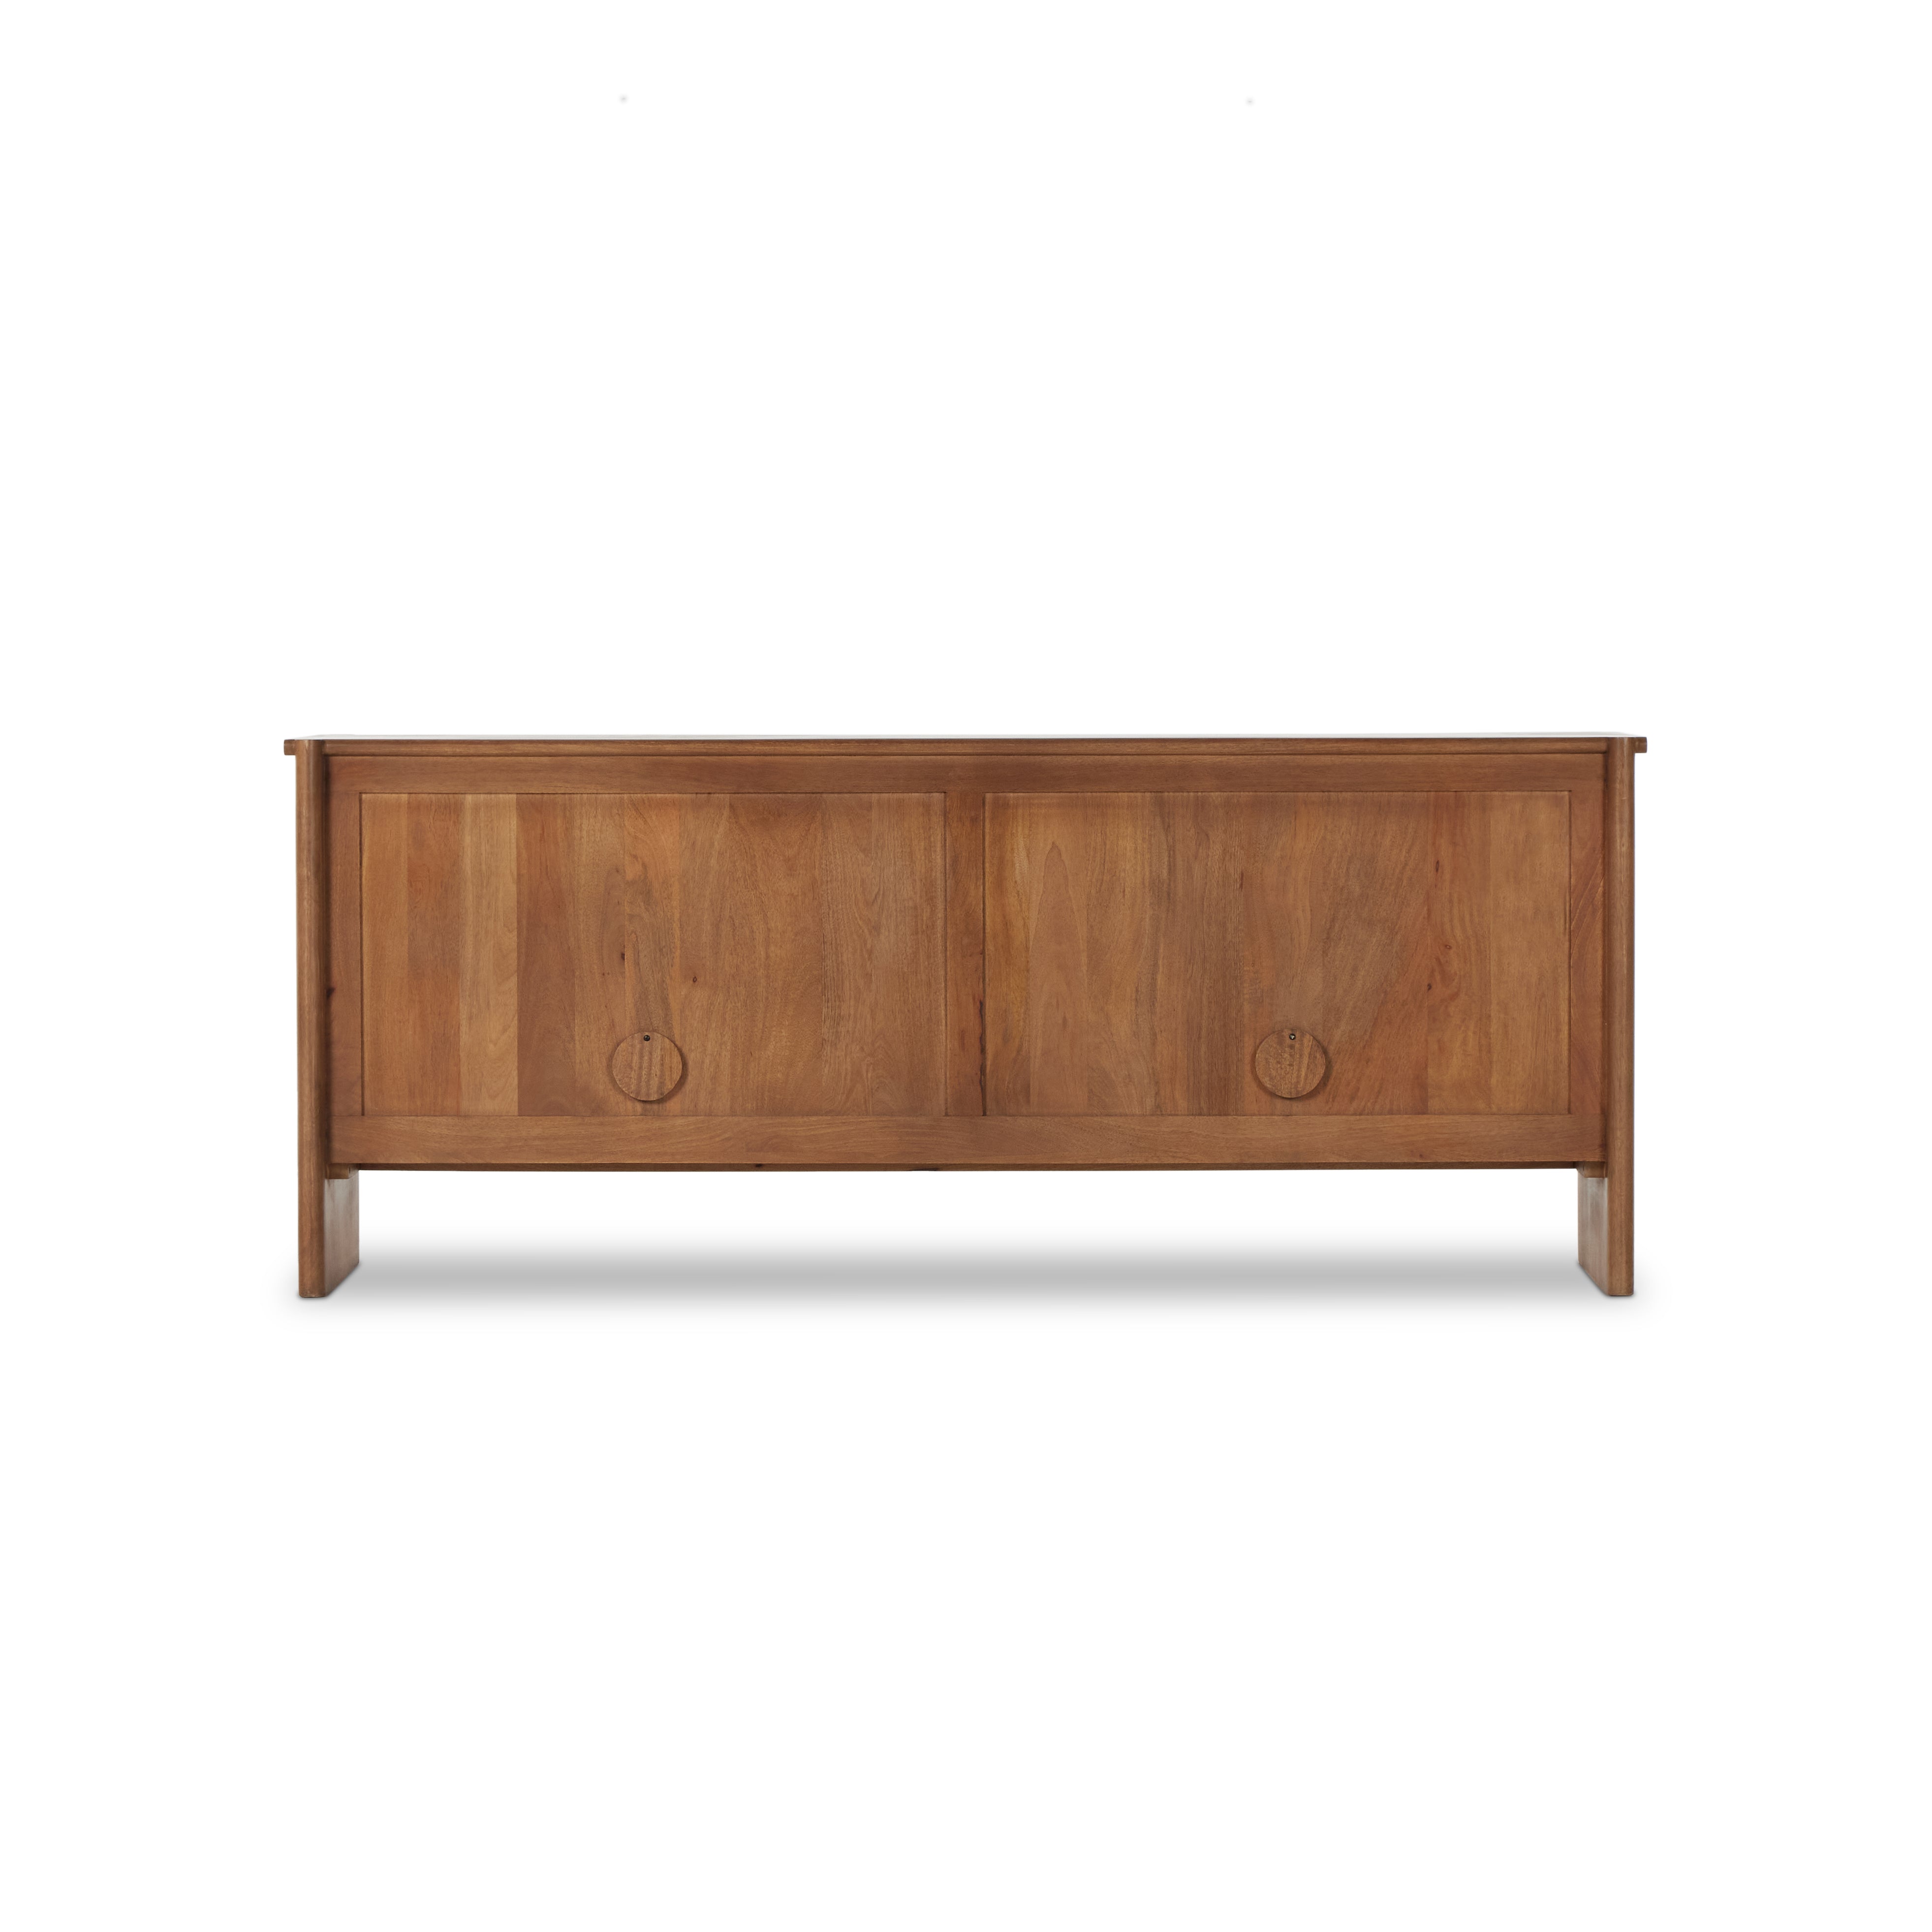 Curved edges and connection points meet leather door fronts, creating a smooth hand feel and look. Rounded offset hardware finishes this mango wood sideboard. Amethyst Home provides interior design, new construction, custom furniture, and area rugs in the Houston metro area.